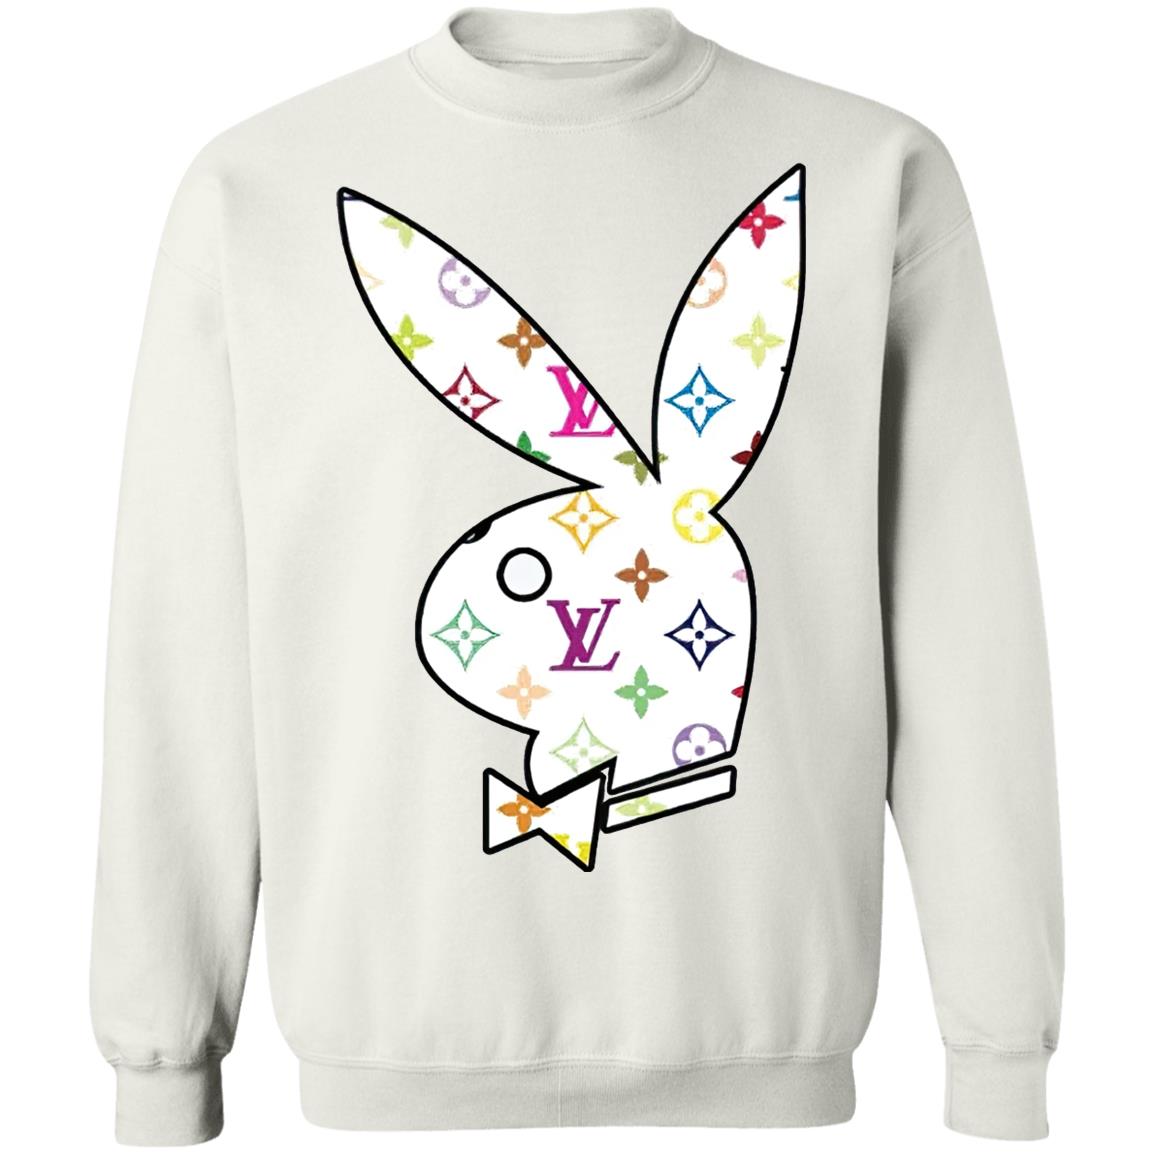 Louis Vuitton bunny T-Shirt in black and white 